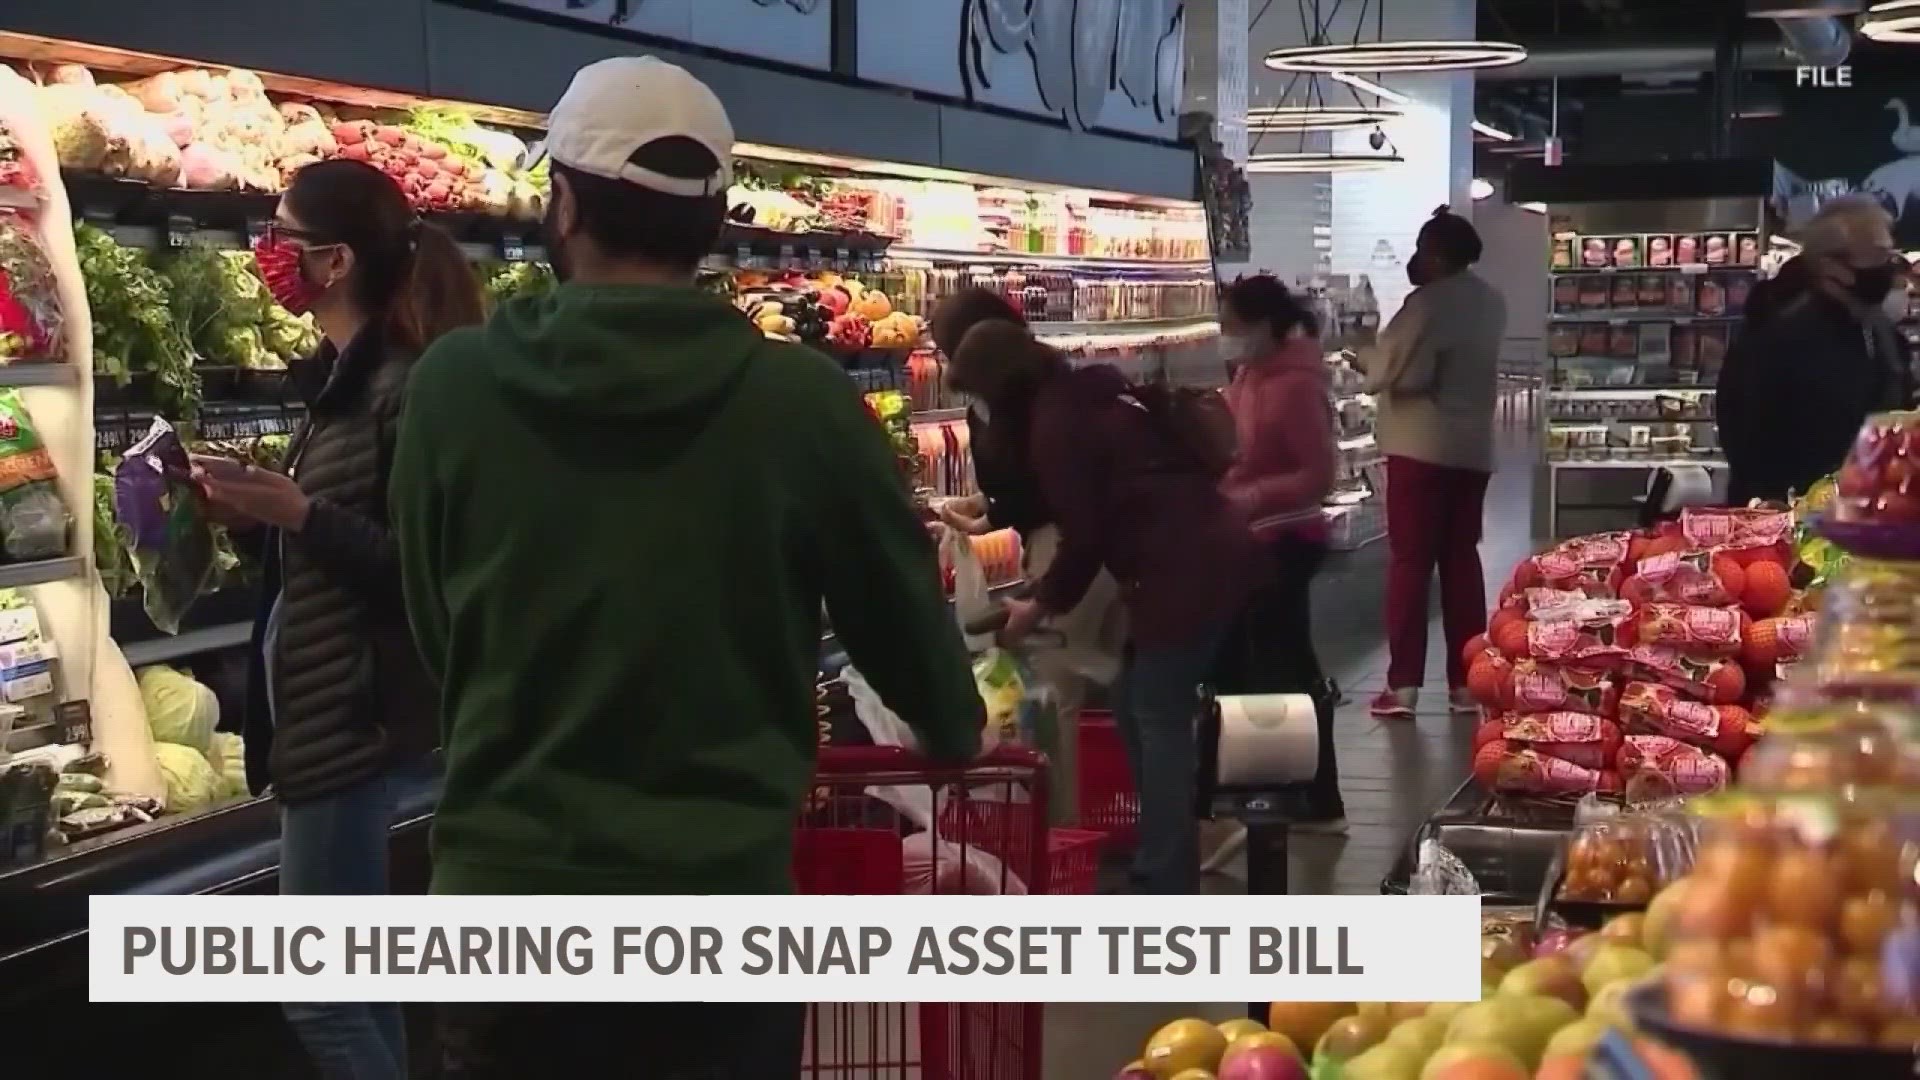 If the bill becomes law, it's estimated that around 2,800 Iowans will lose their SNAP benefits because of the asset testing requirement.